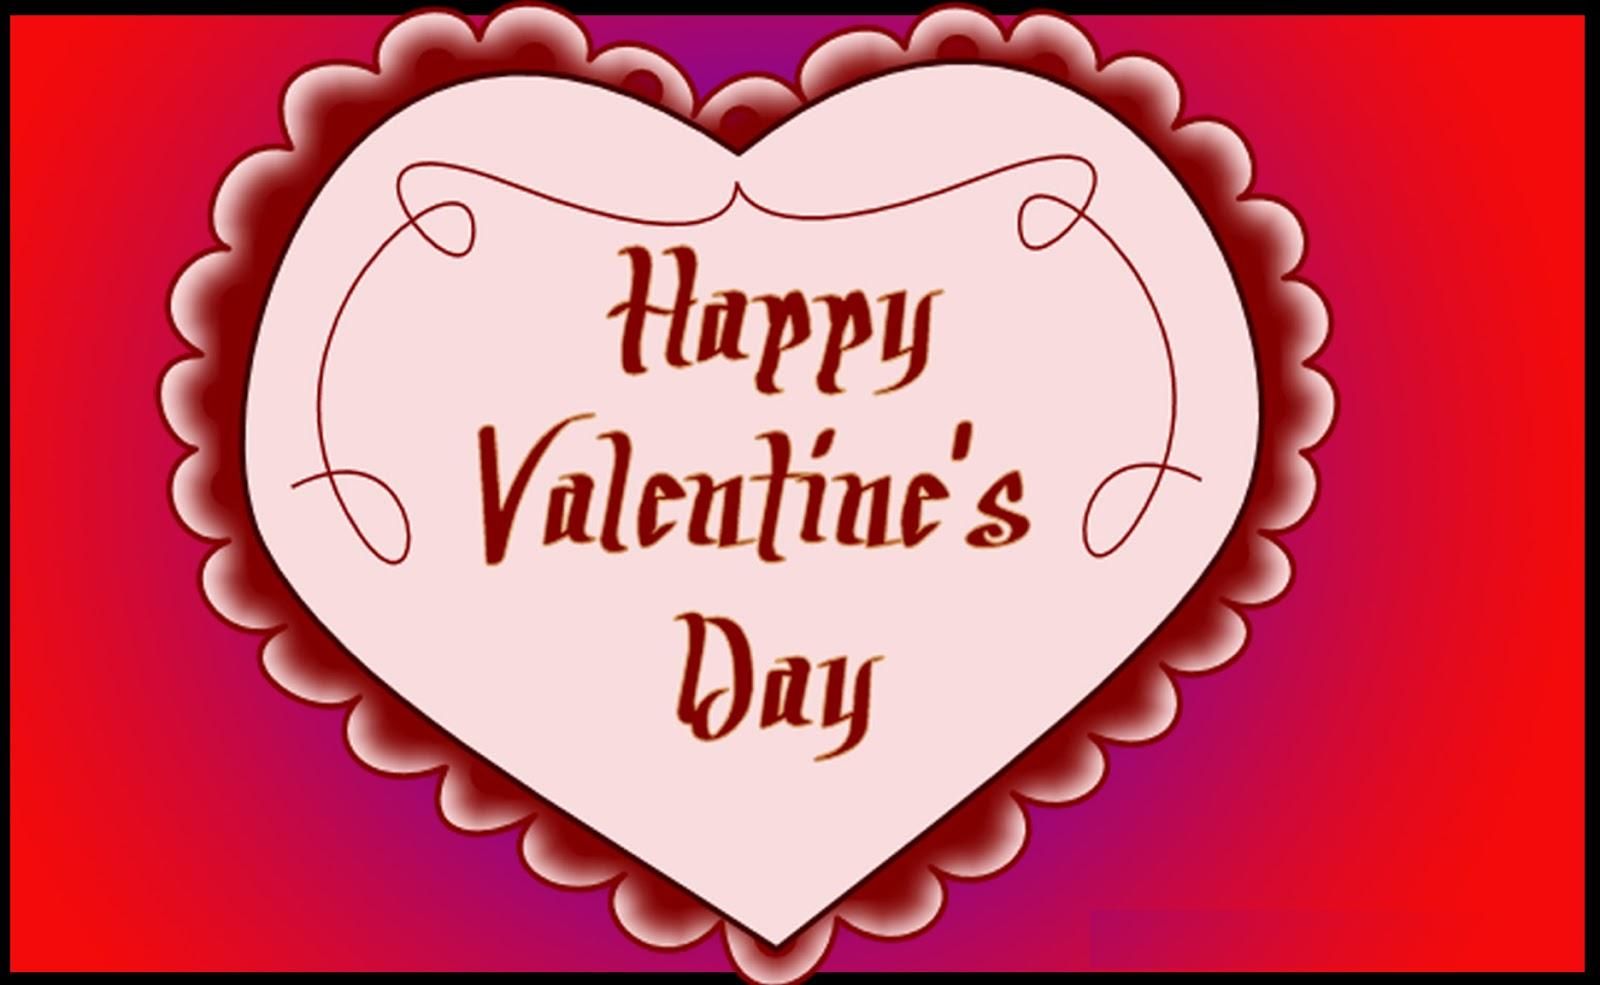 Advance 14 Feb Happy Valentine's Day Whatsapp Dp Images Wallpapers ...